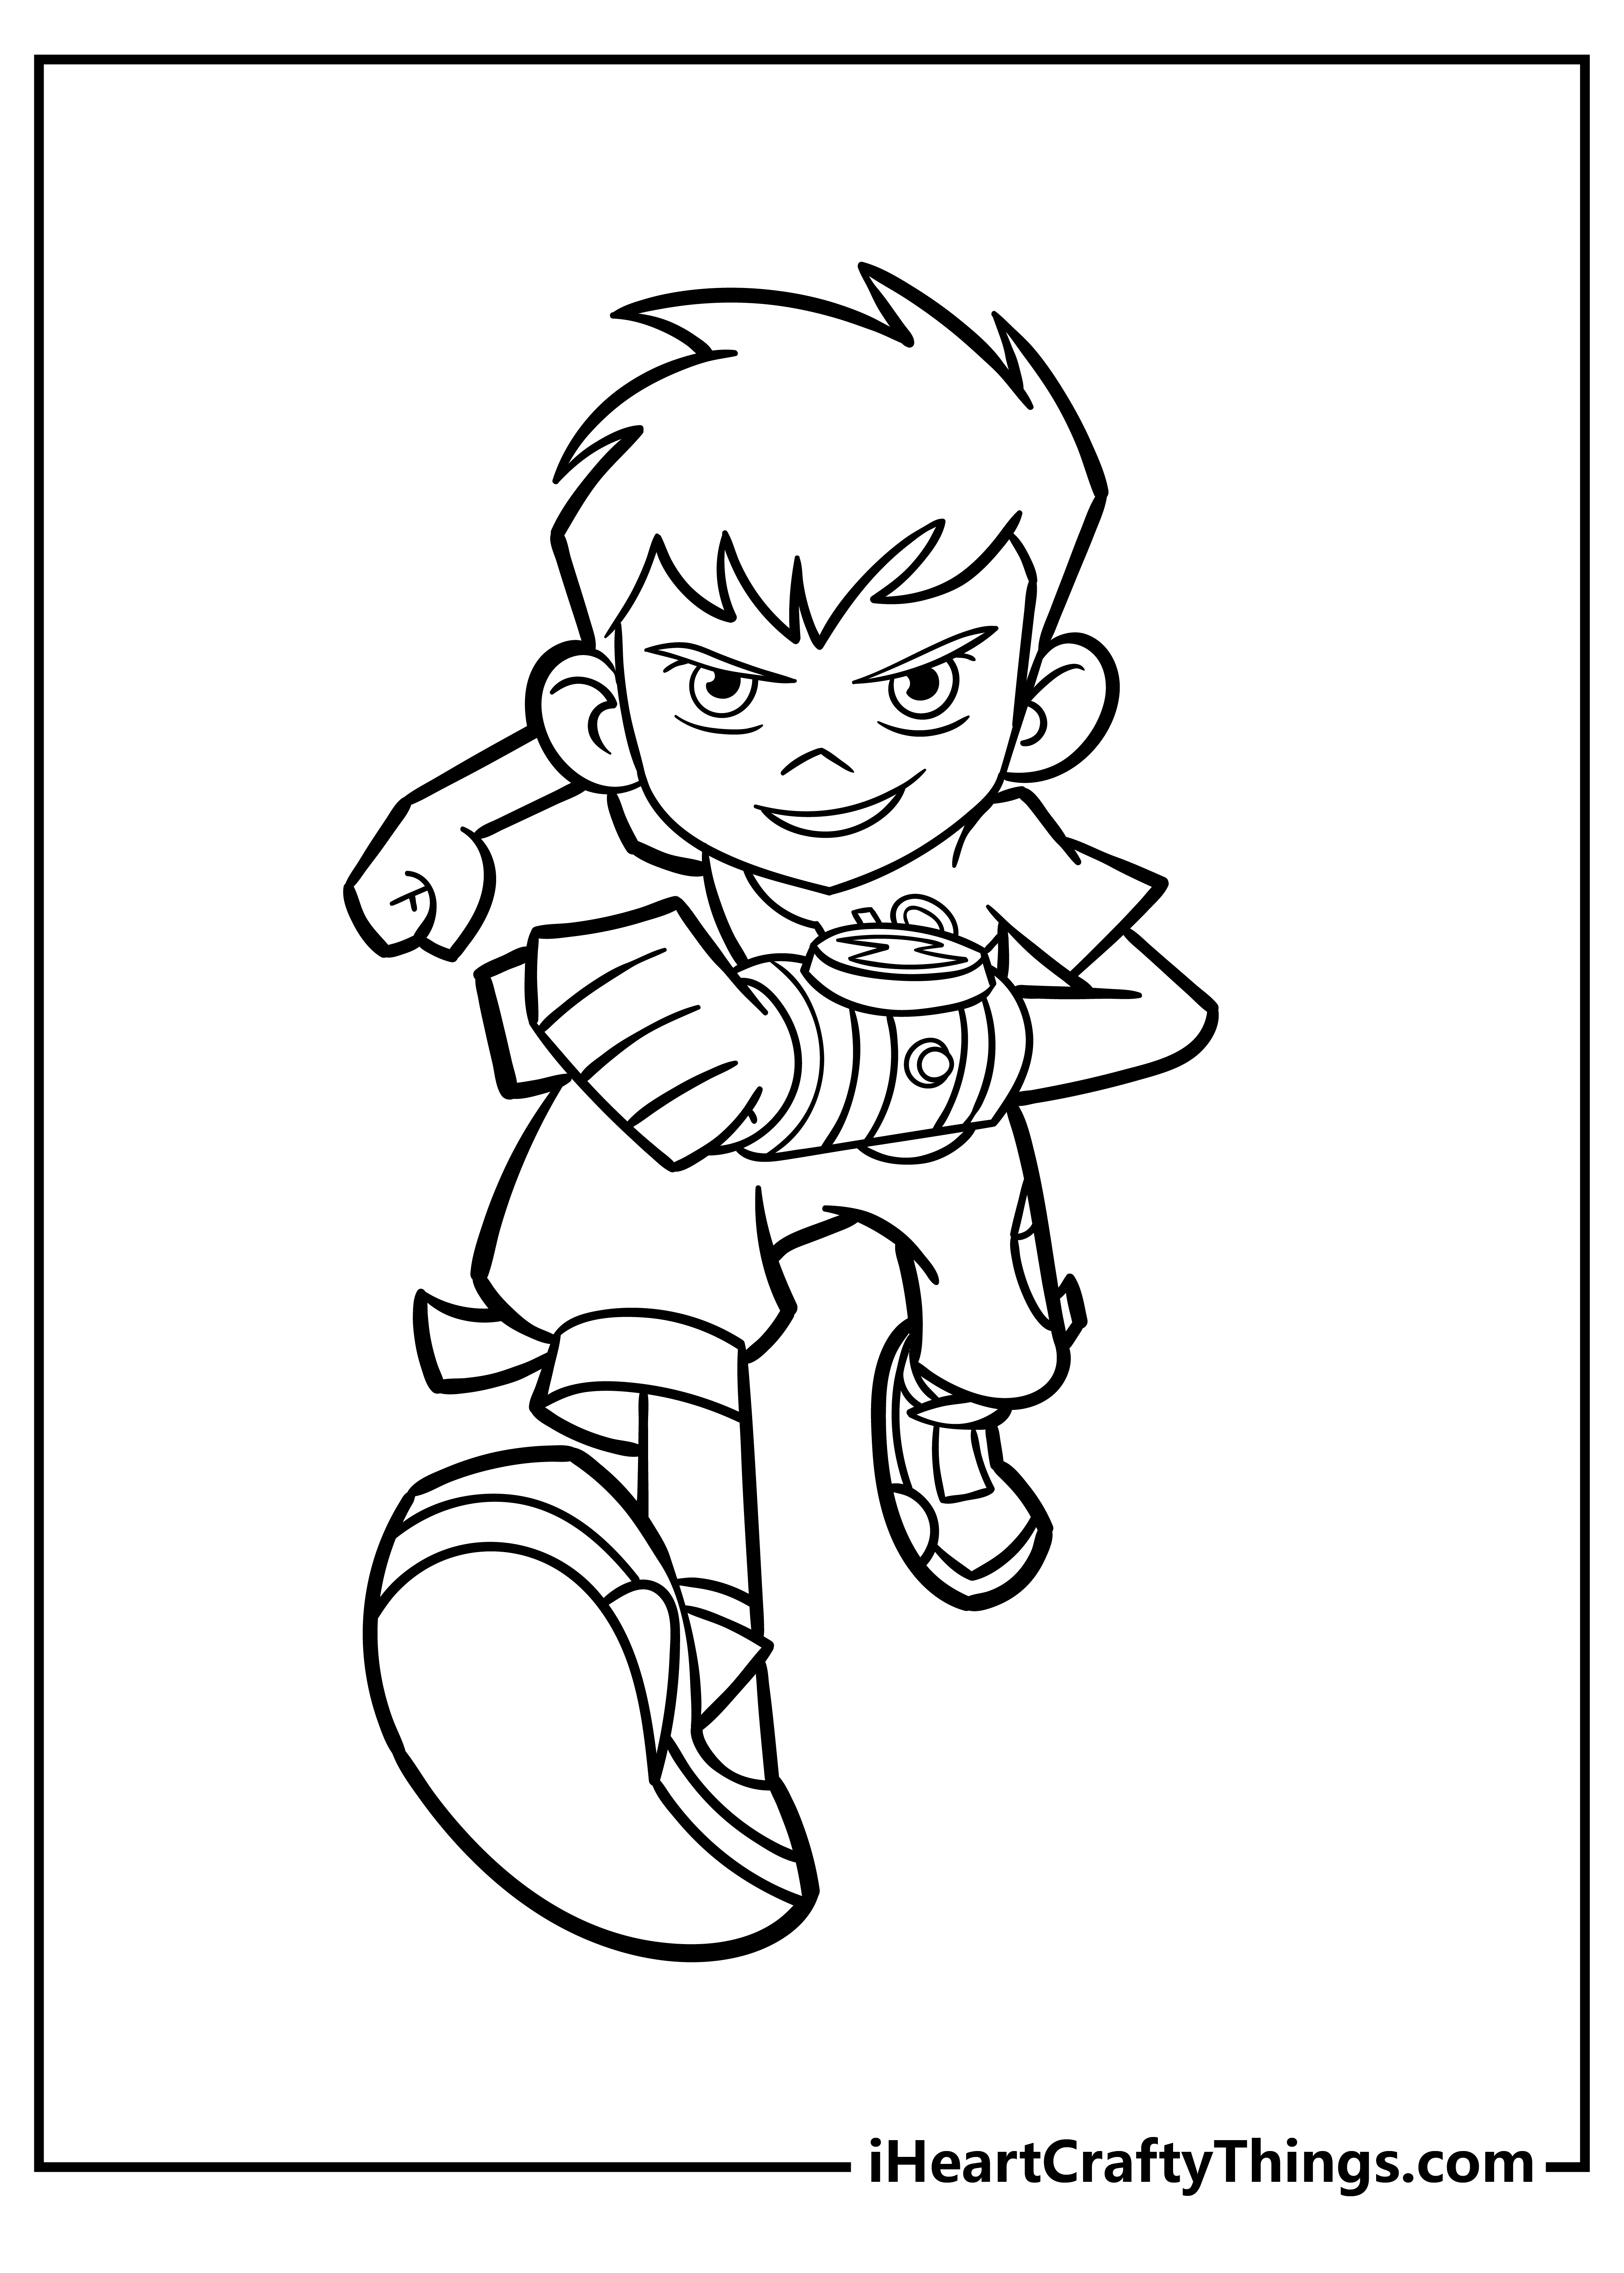 Ben 10 Coloring Pages for adults free printable